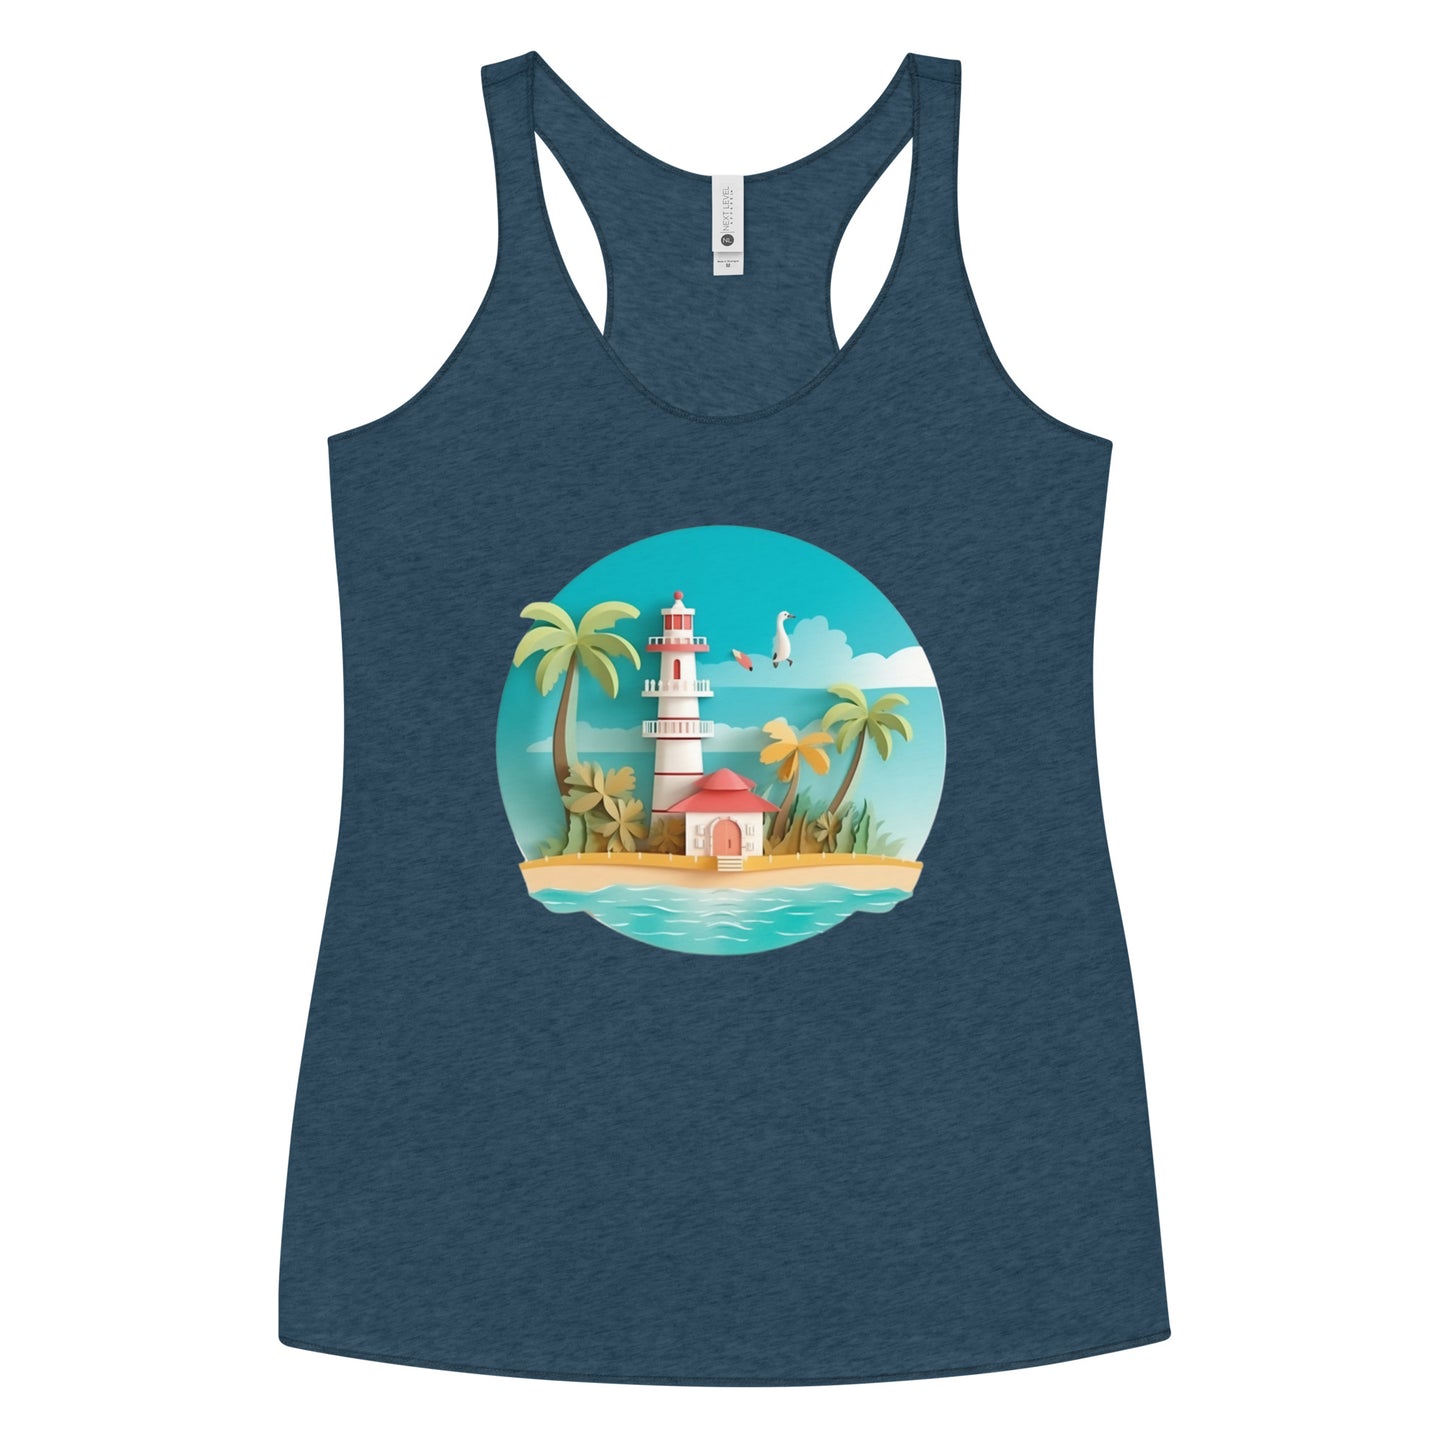 Indigo blue tank top with picture of lighthouse and palm trees